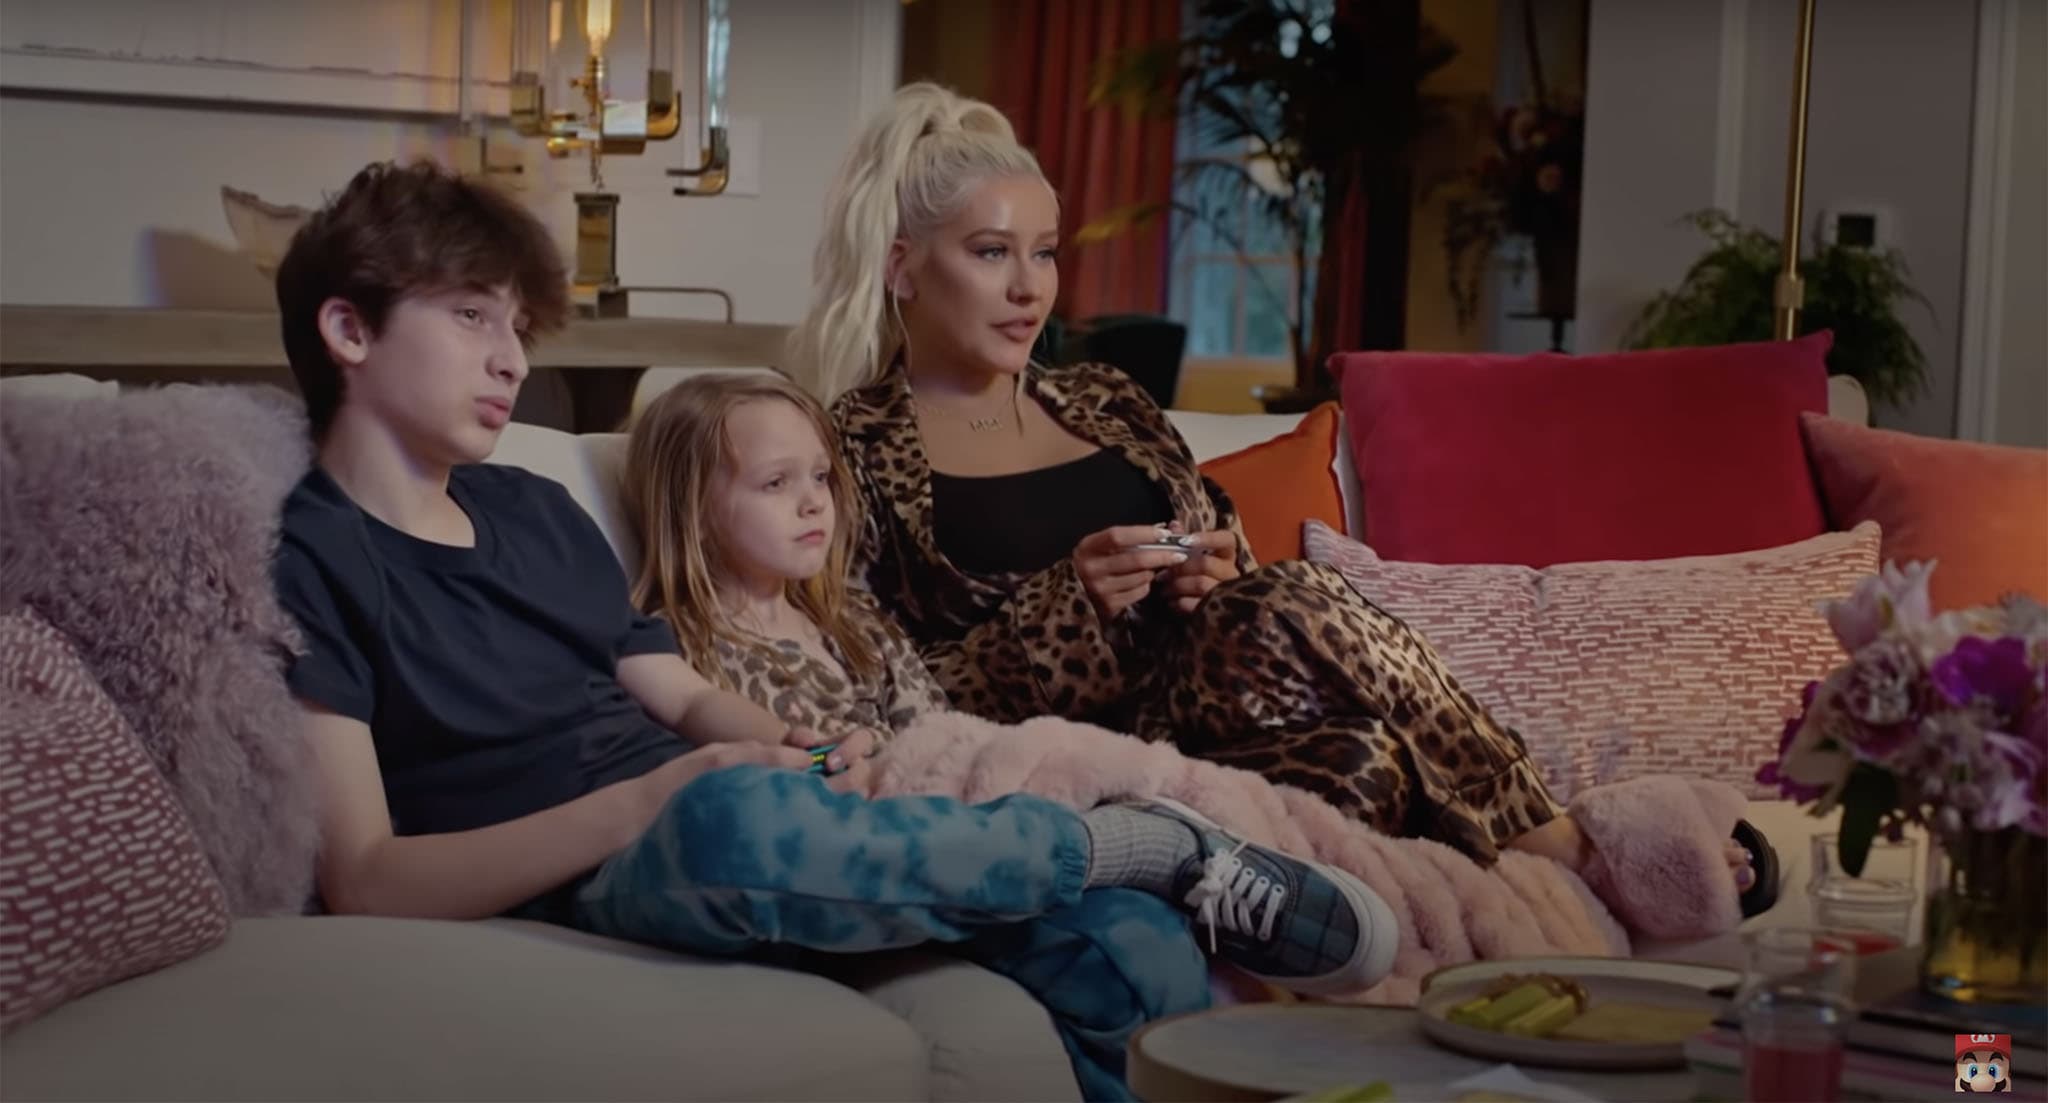 Christina Aguilera's kids Max, 13, and Summer, 7, appear with the singer in the Nintendo Switch commercial